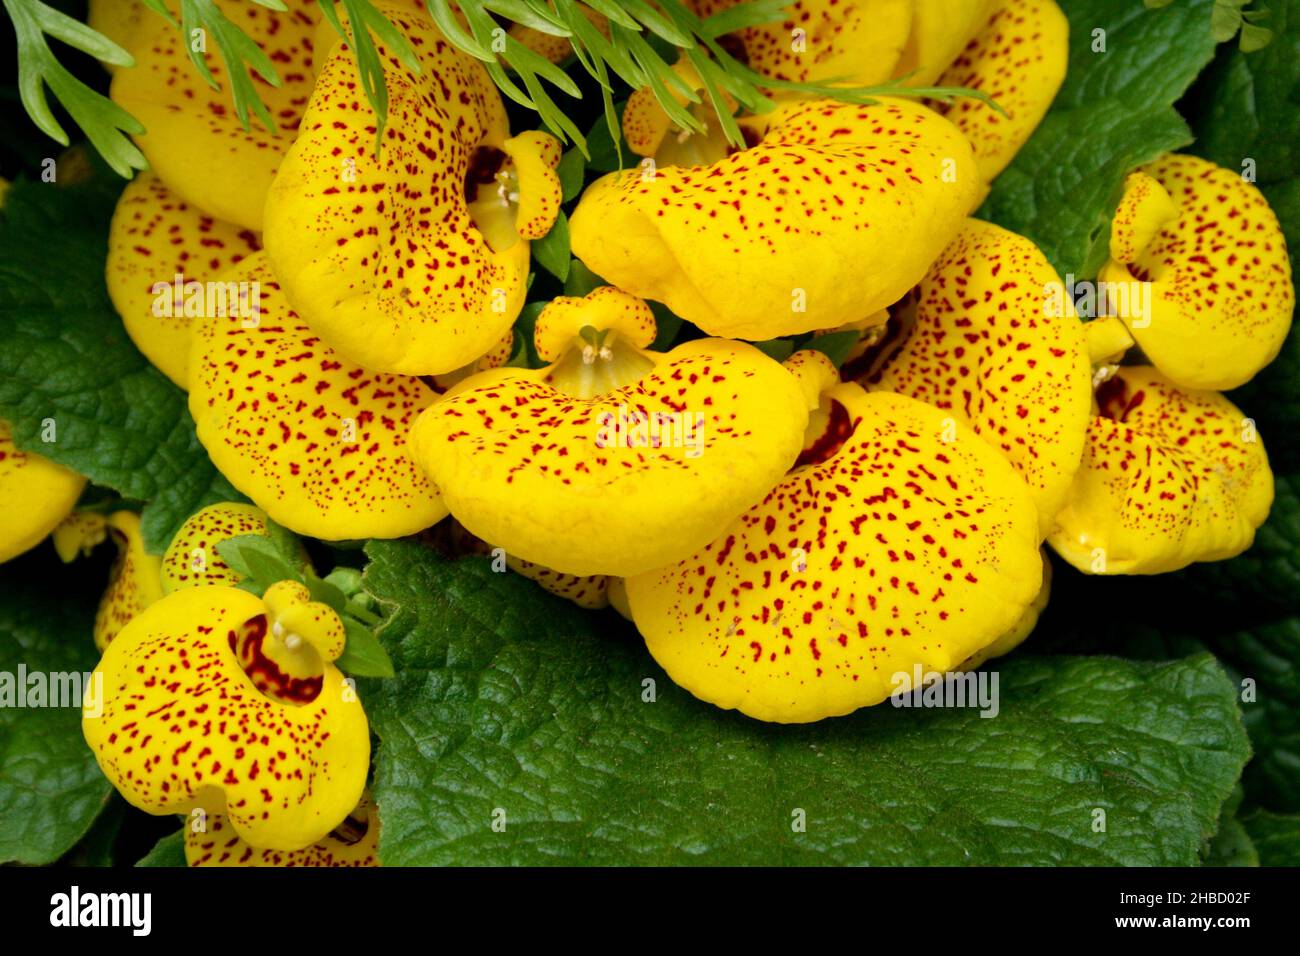 Calceolaria plant also called lady's purse, slipper flower, pocketbook flower or slipperwort, Stock Photo